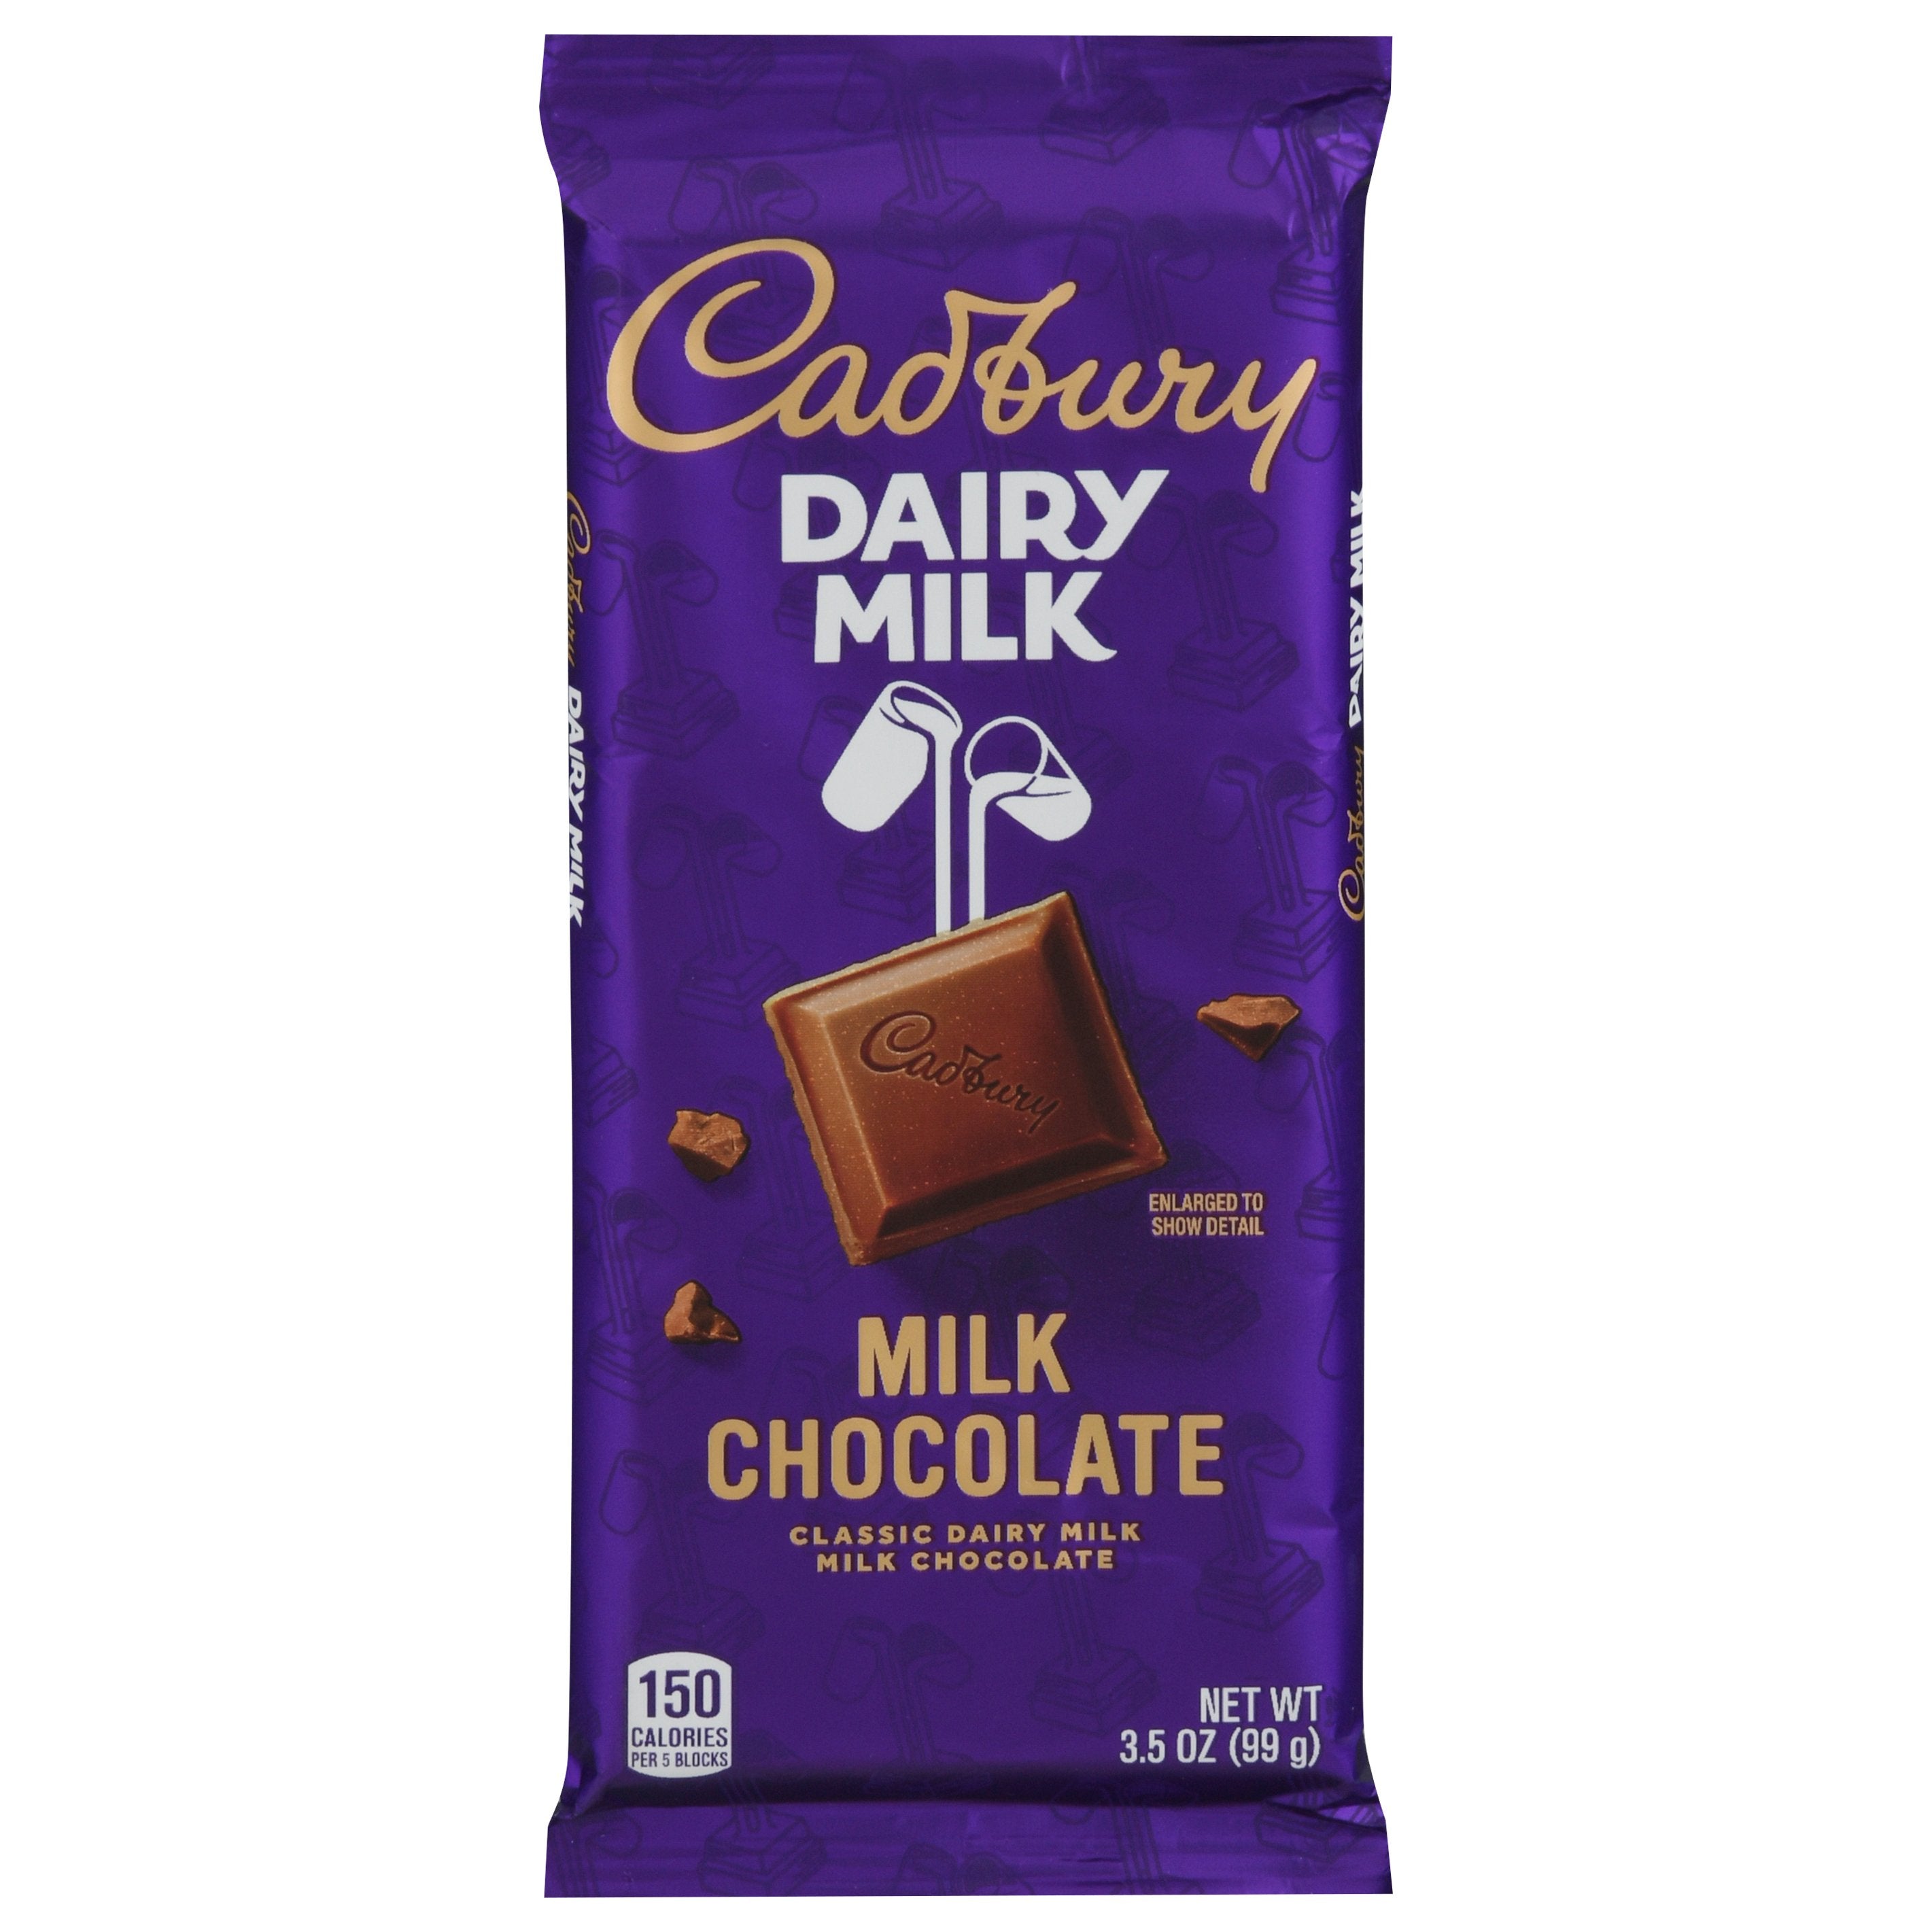 CADBURY DAIRY MILK KING SIZE CANADIAN CHOCOLATE CANDY BARS MANY FLAVOURS